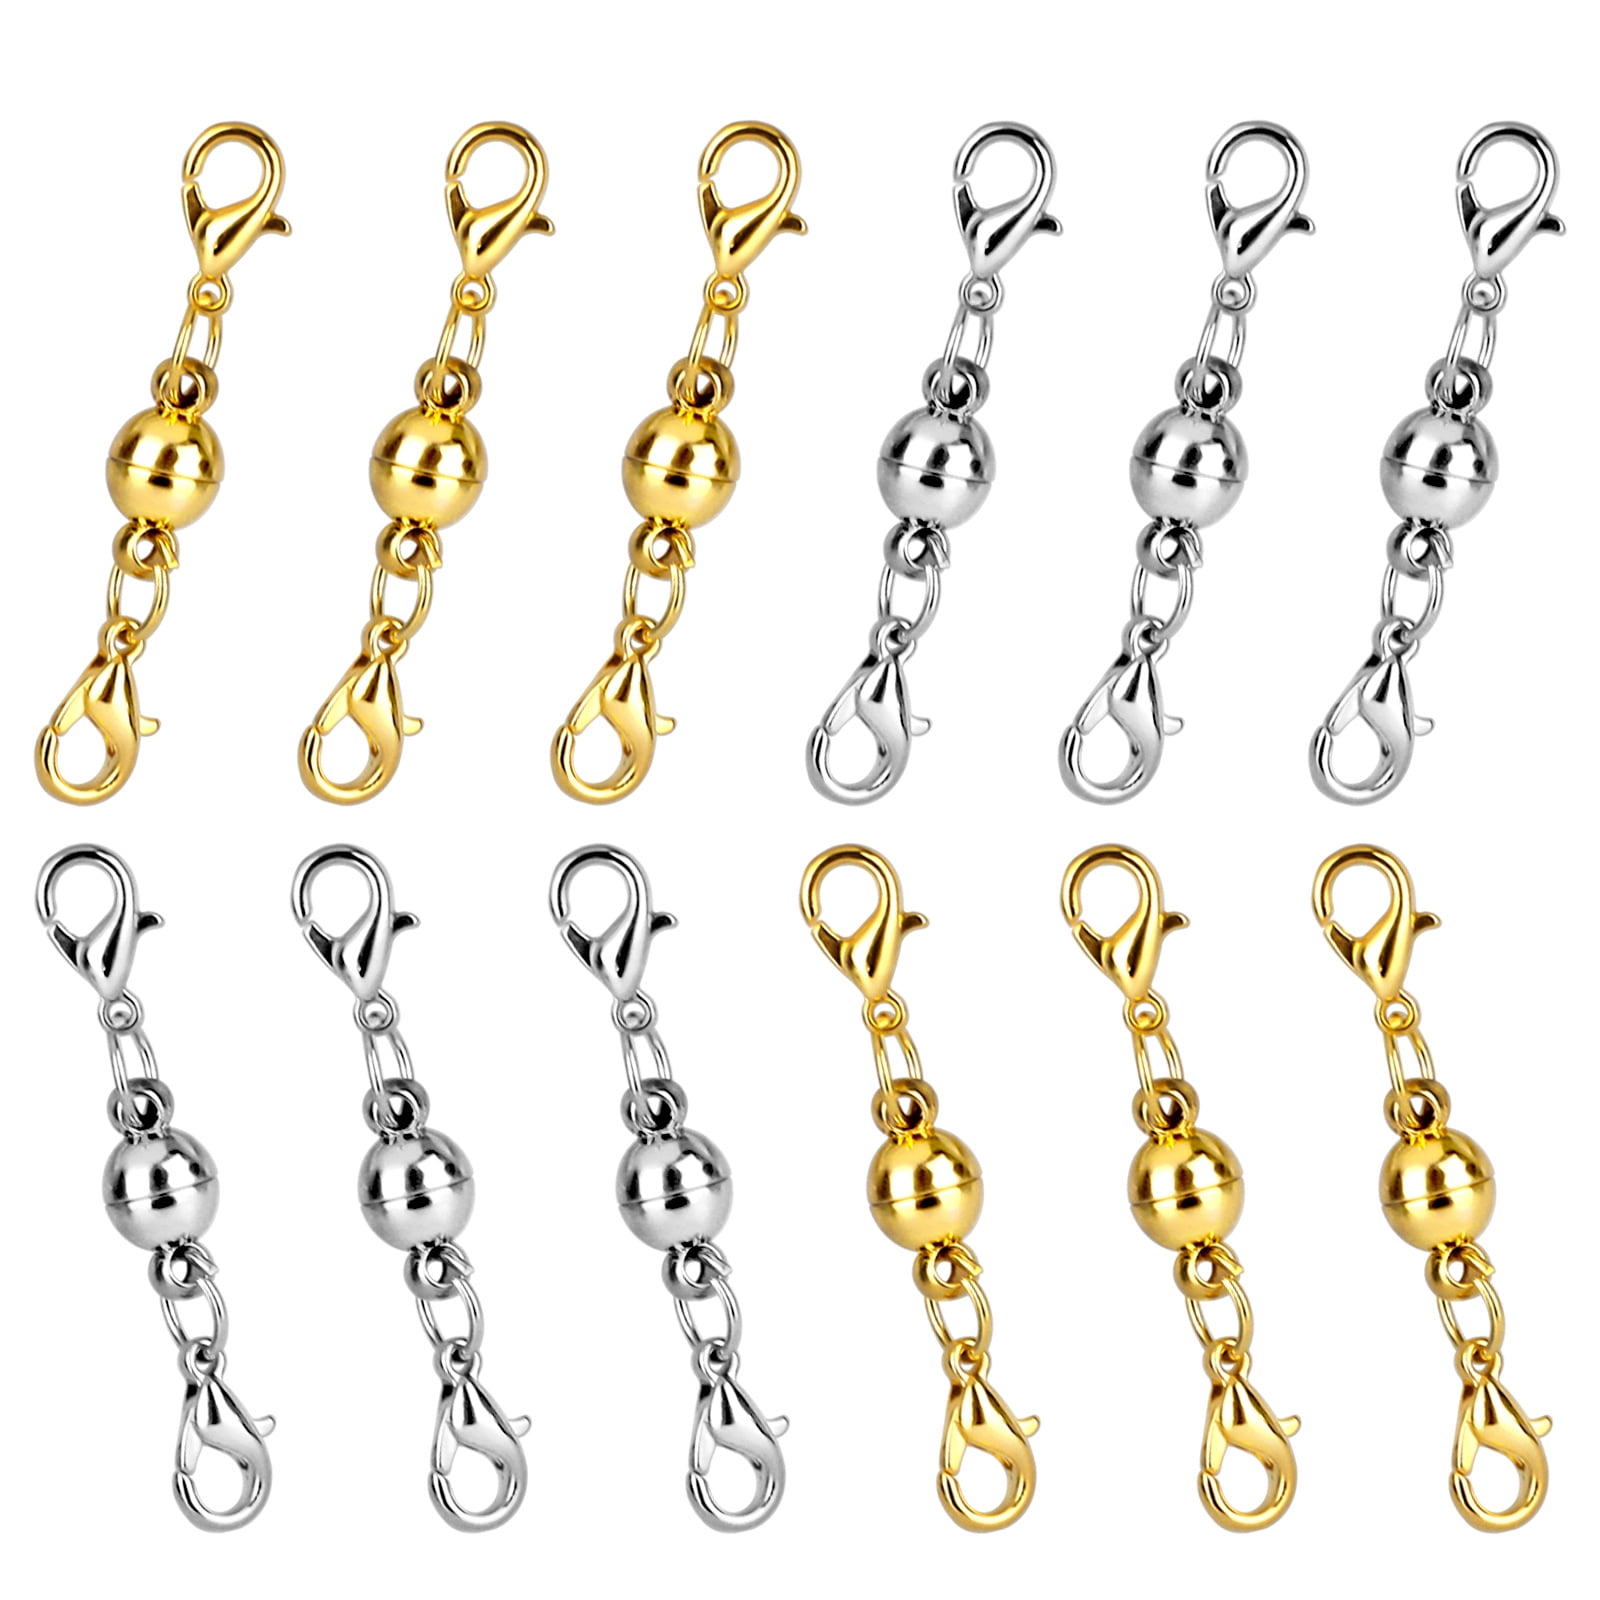 10X Silver Plated Tone Strong Magnetic Clasp Hooks Necklace Findings Jewelry DIY